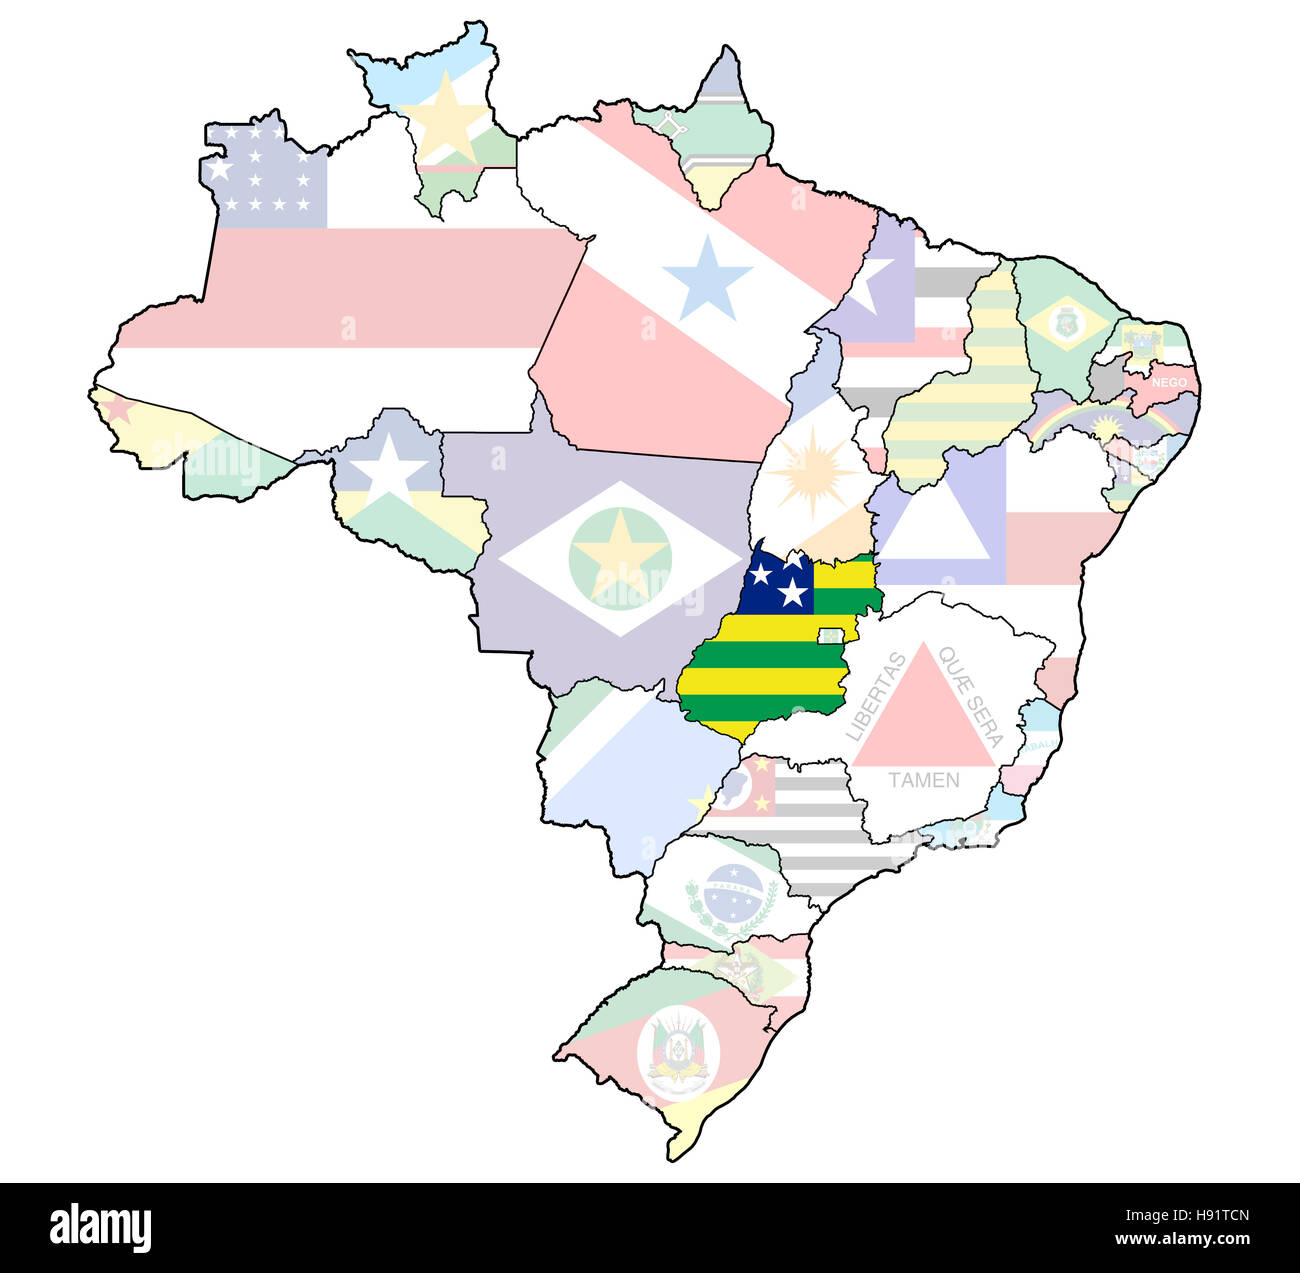 goias state on admistration map of brazil with flags Stock Photo